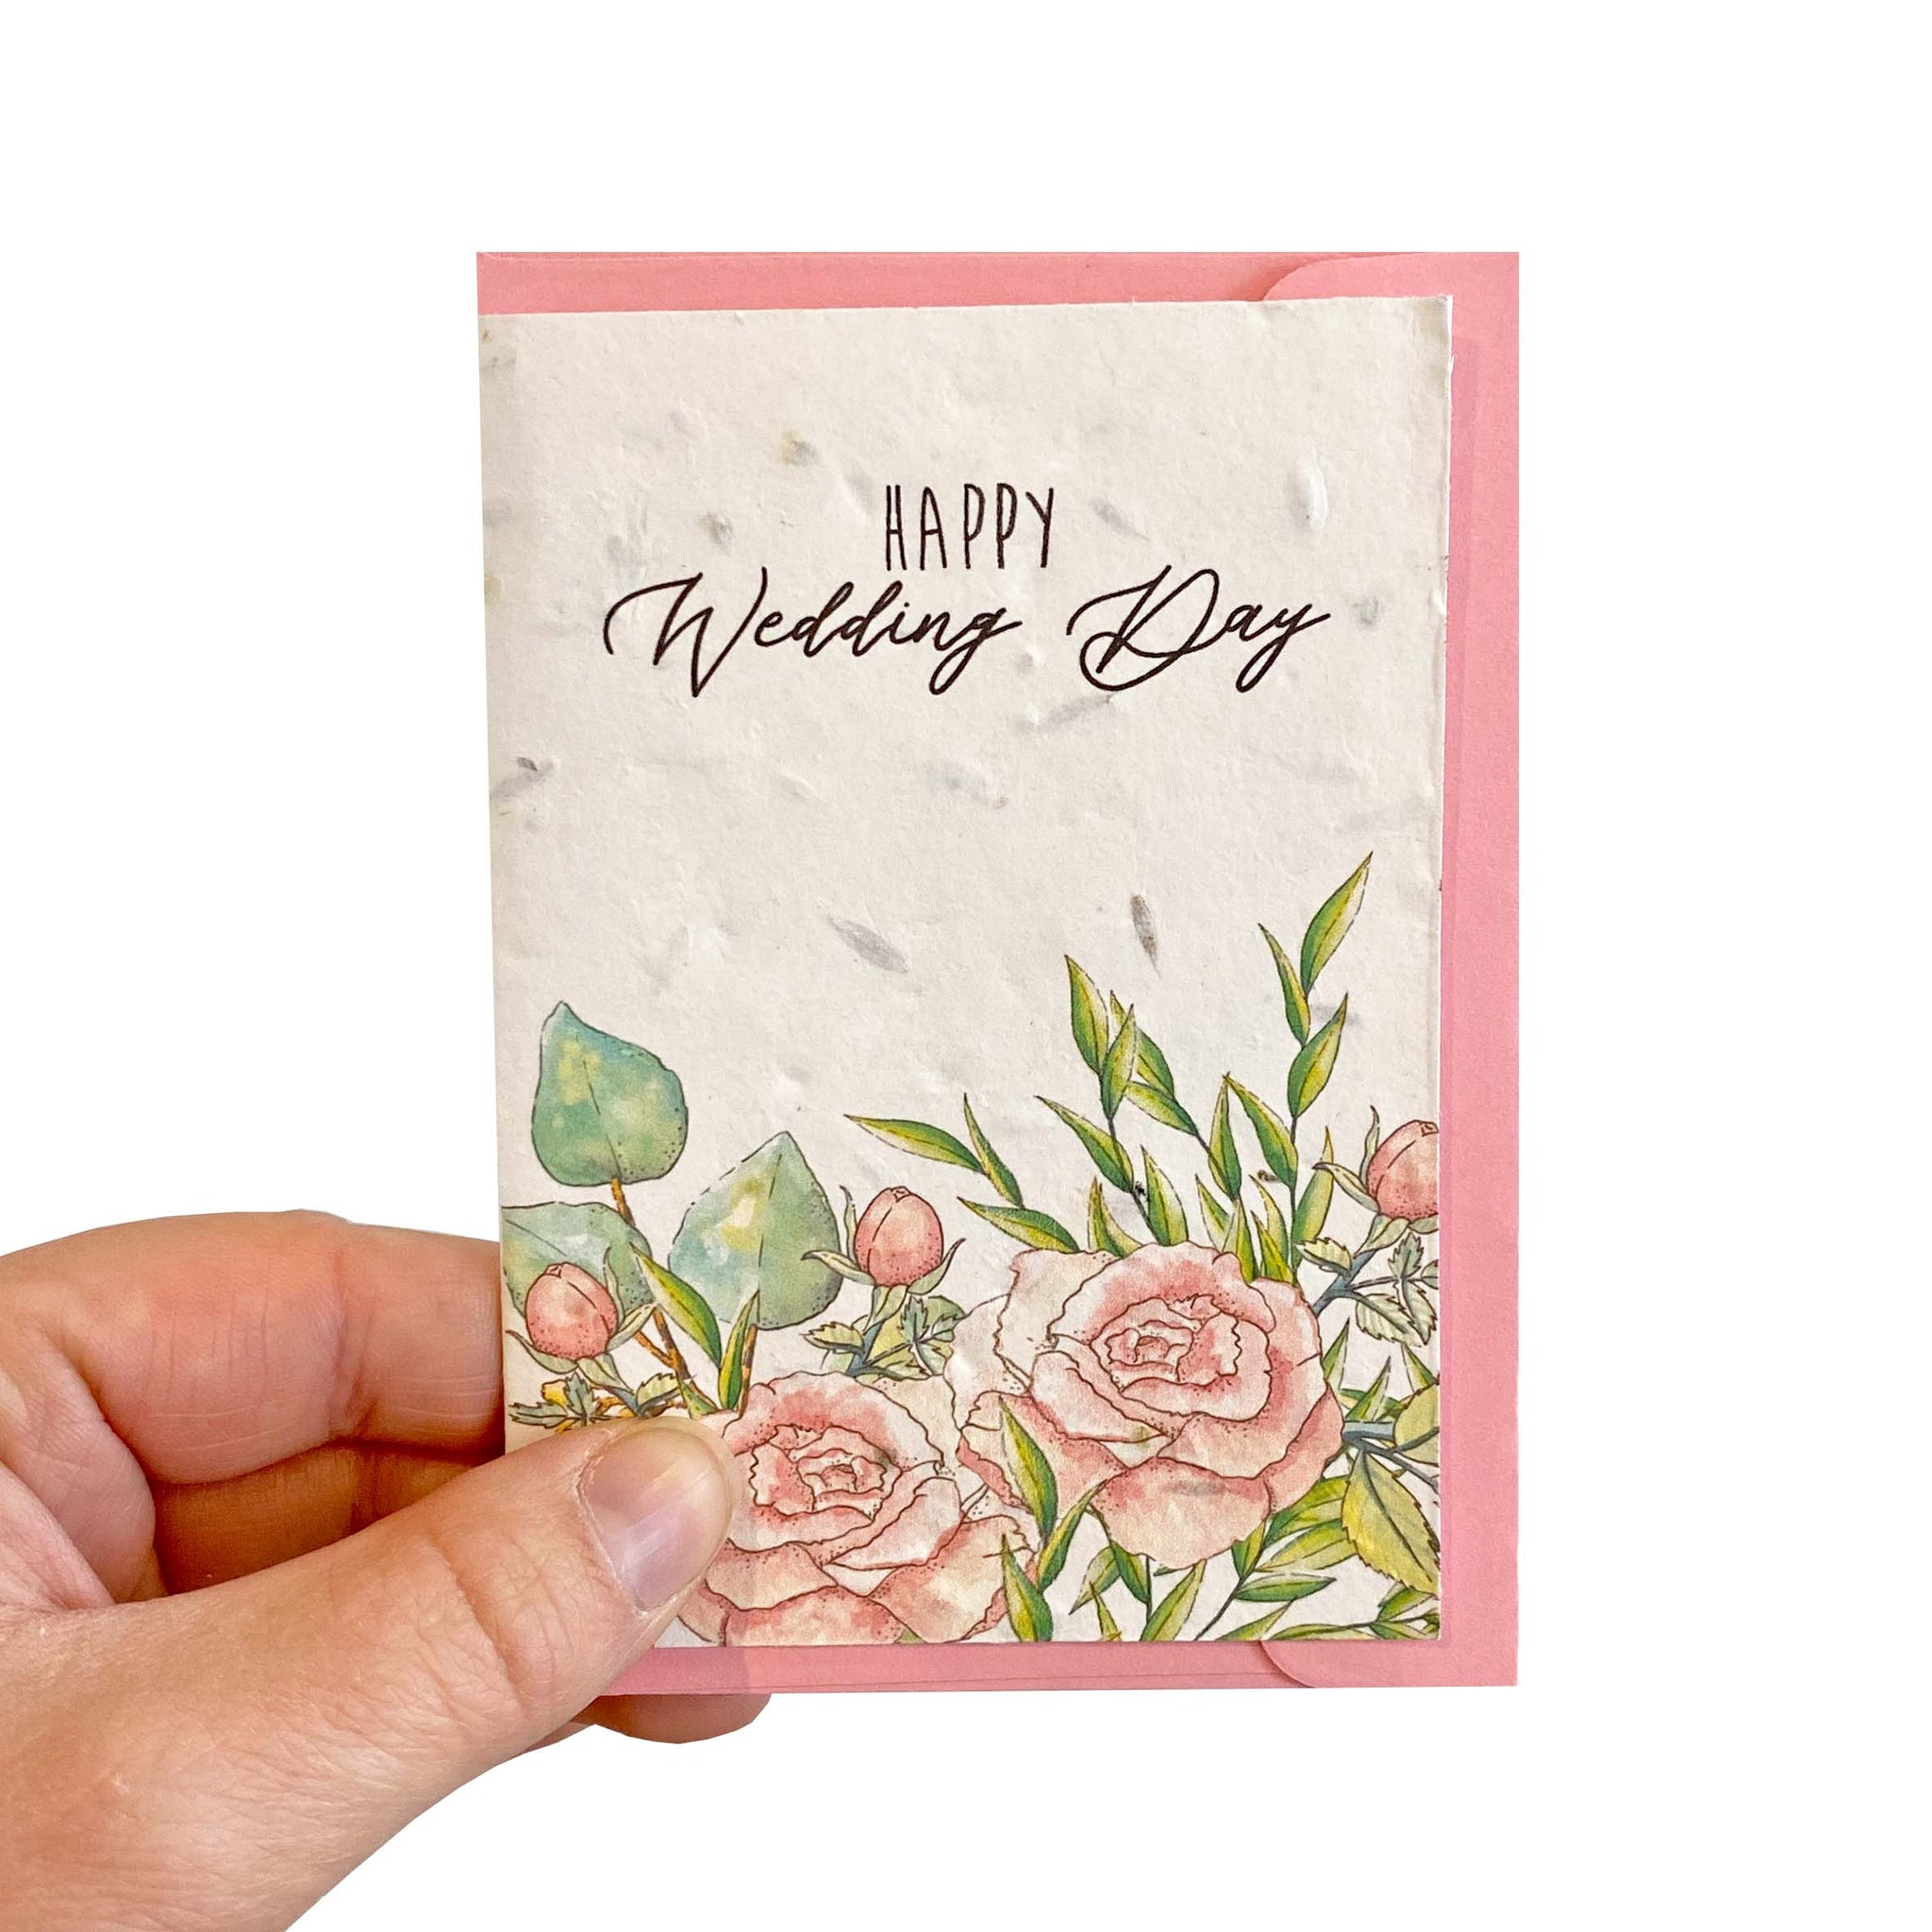 Mini wedding seed card with pink envelope